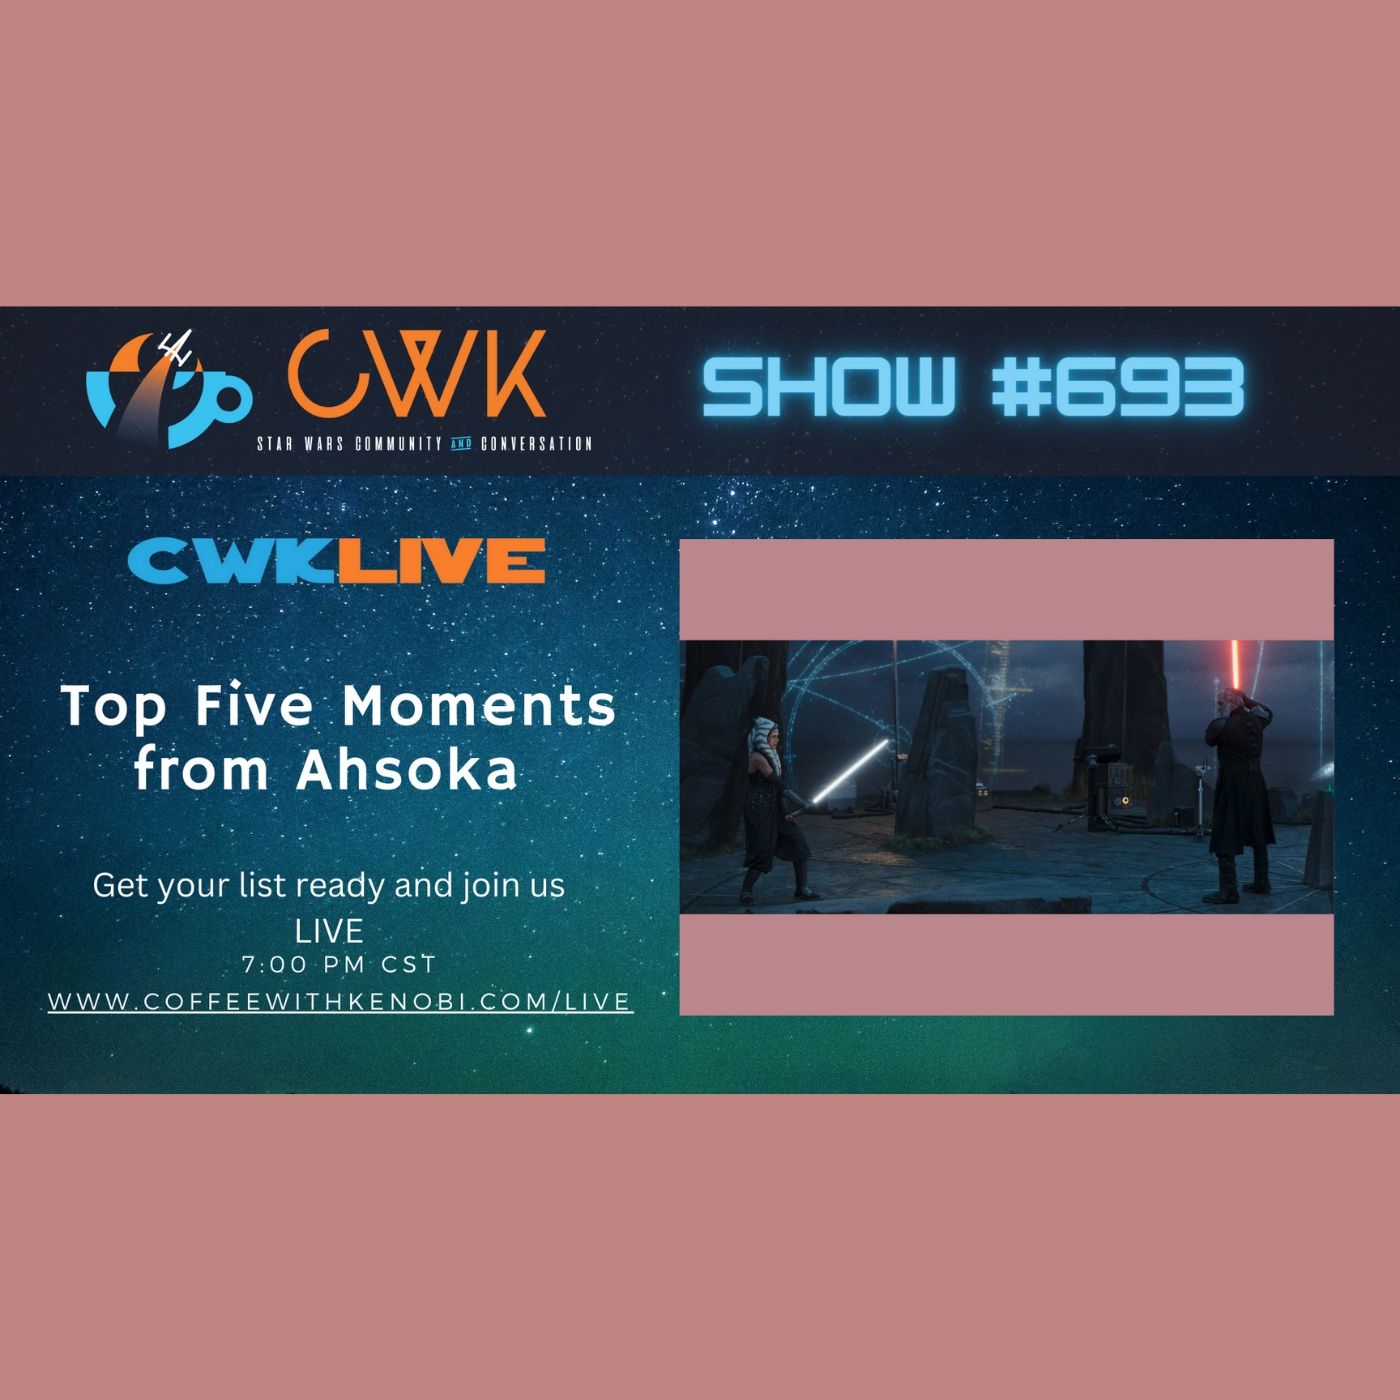 CWK Show #693 LIVE: Top 5 Moments from Ahsoka Episodes 1-8